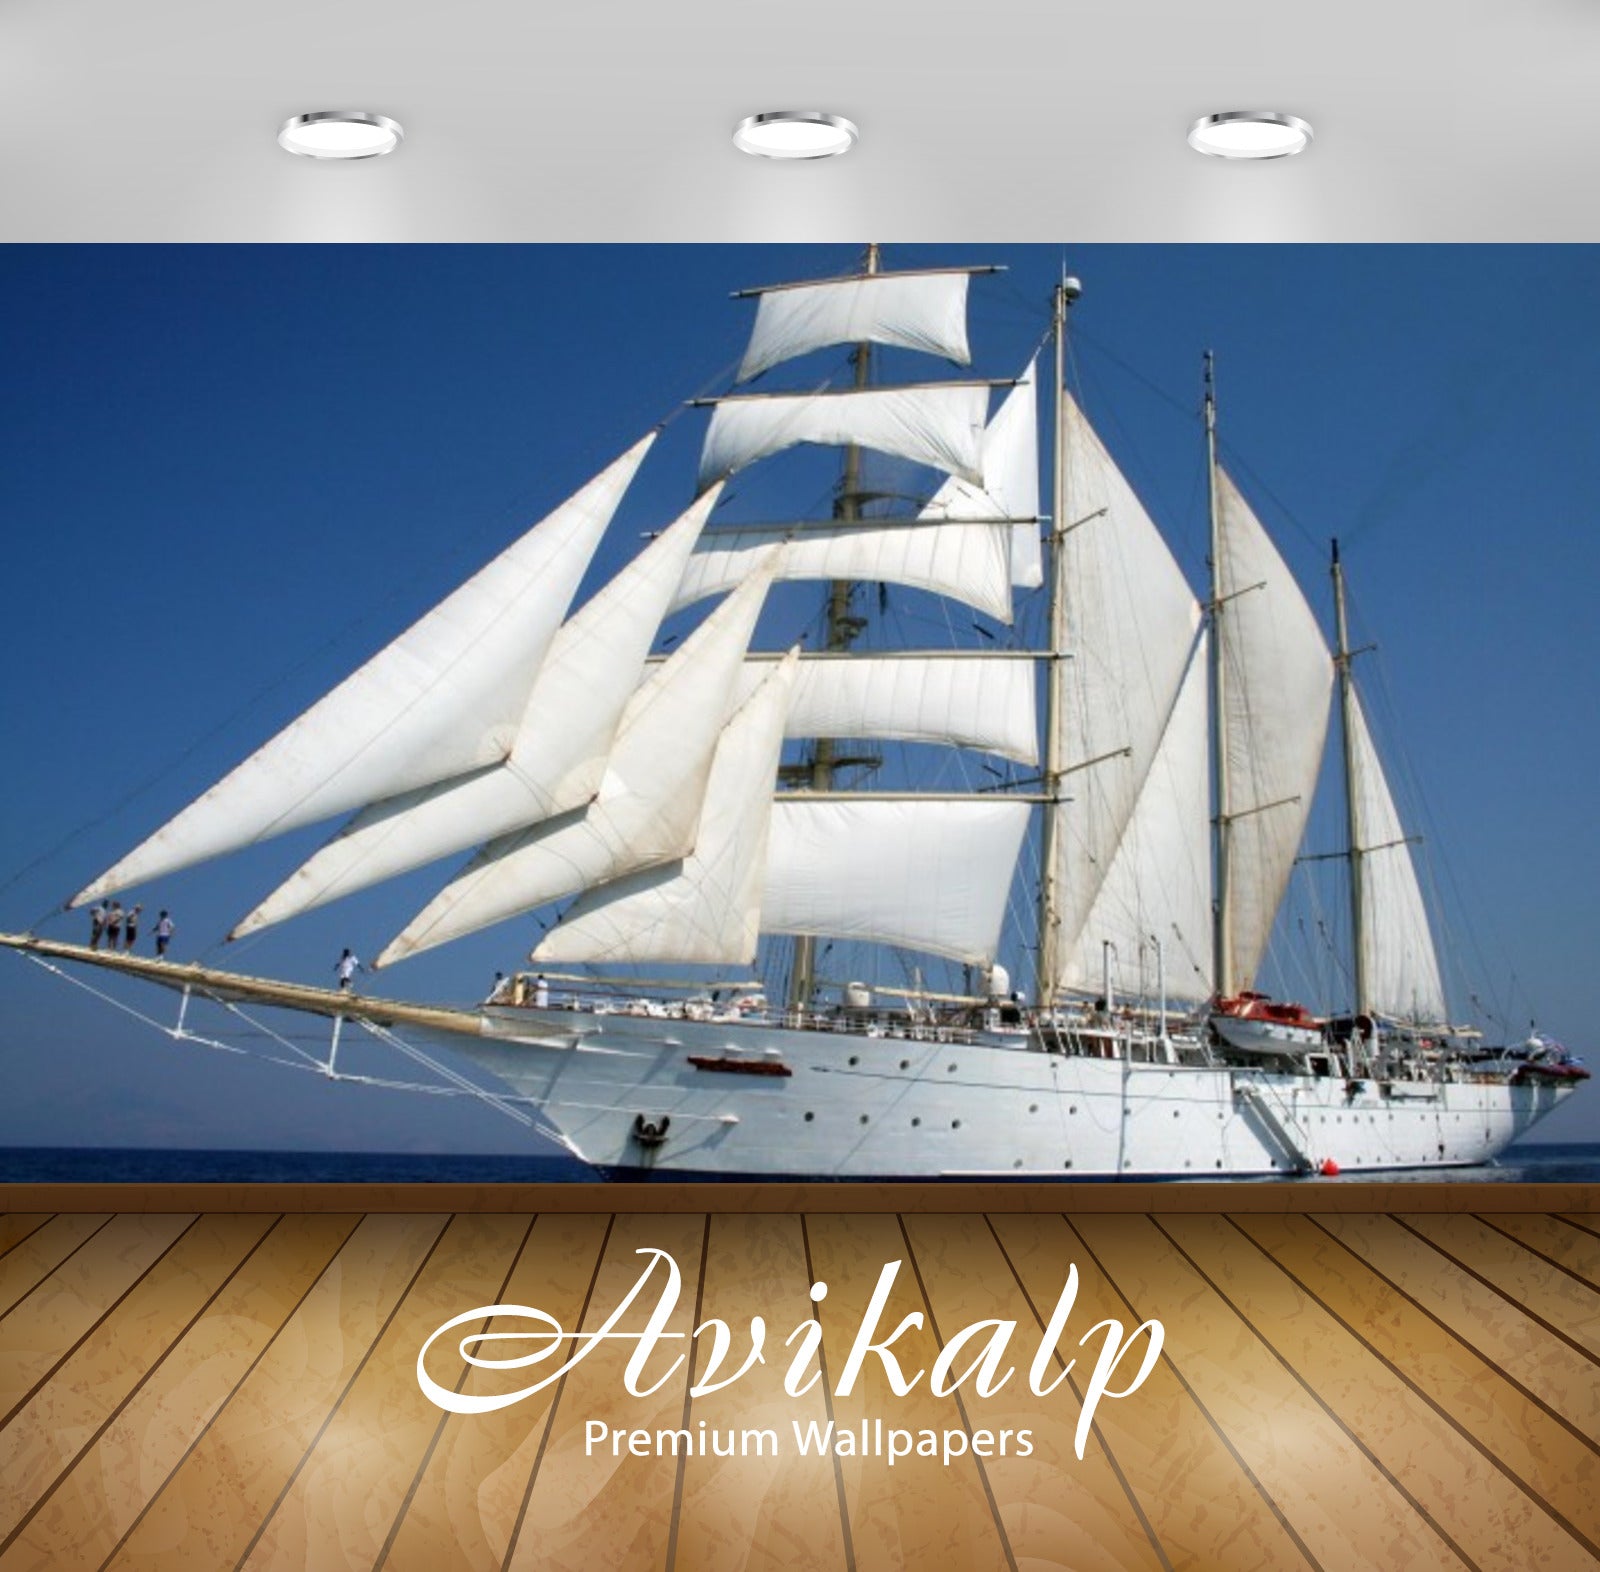 Avikalp Exclusive Awi2706 Beautiful Star Clipper Wonderful Tall Ship Full HD Wallpapers for Living r